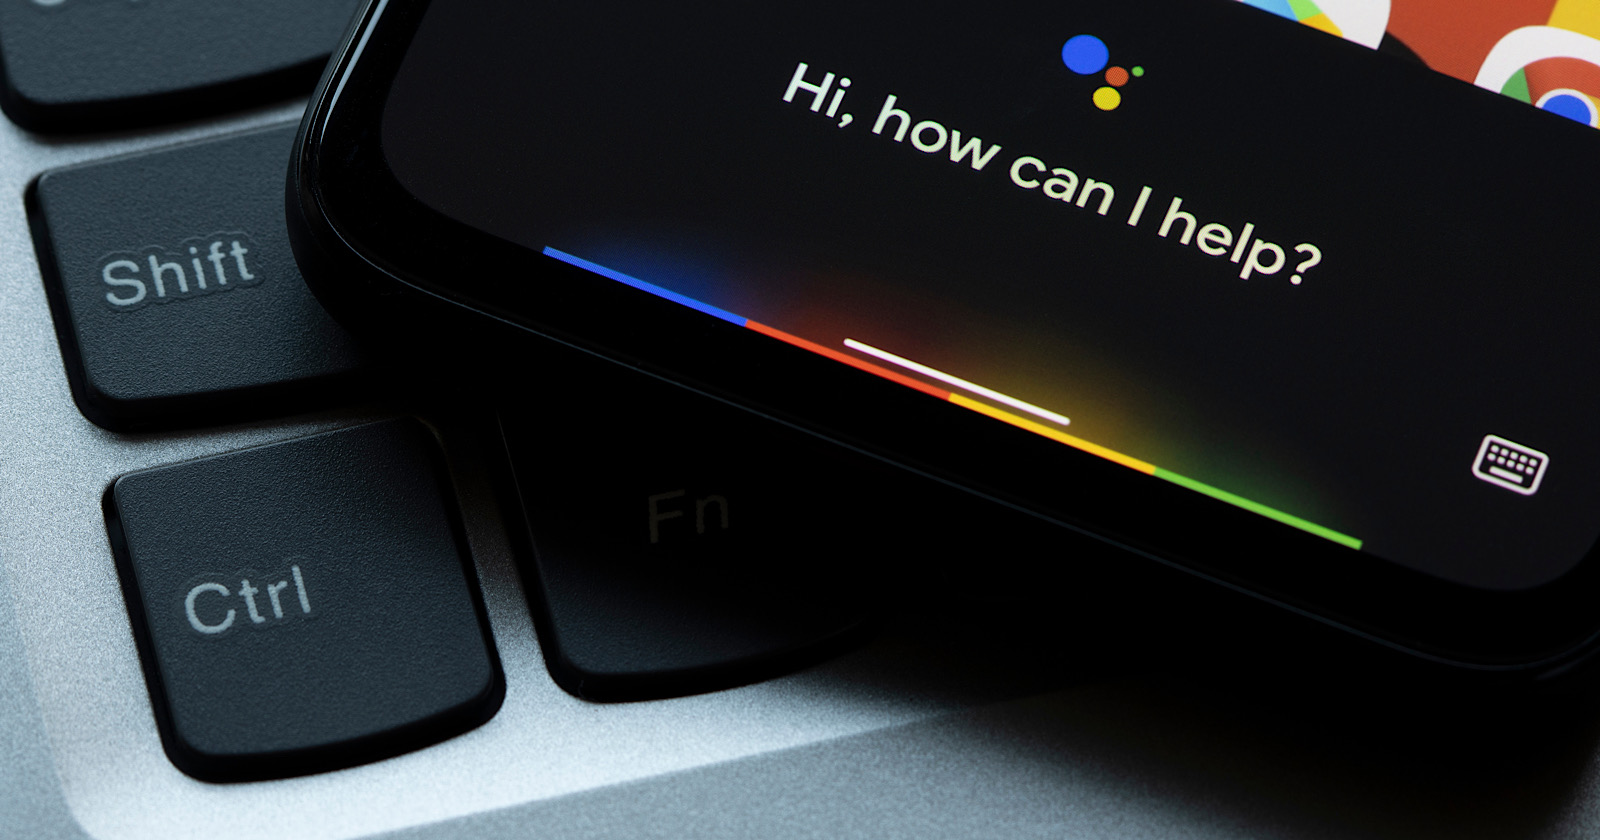 Google Assistant Gets an AI Boost to Help Get Things Done